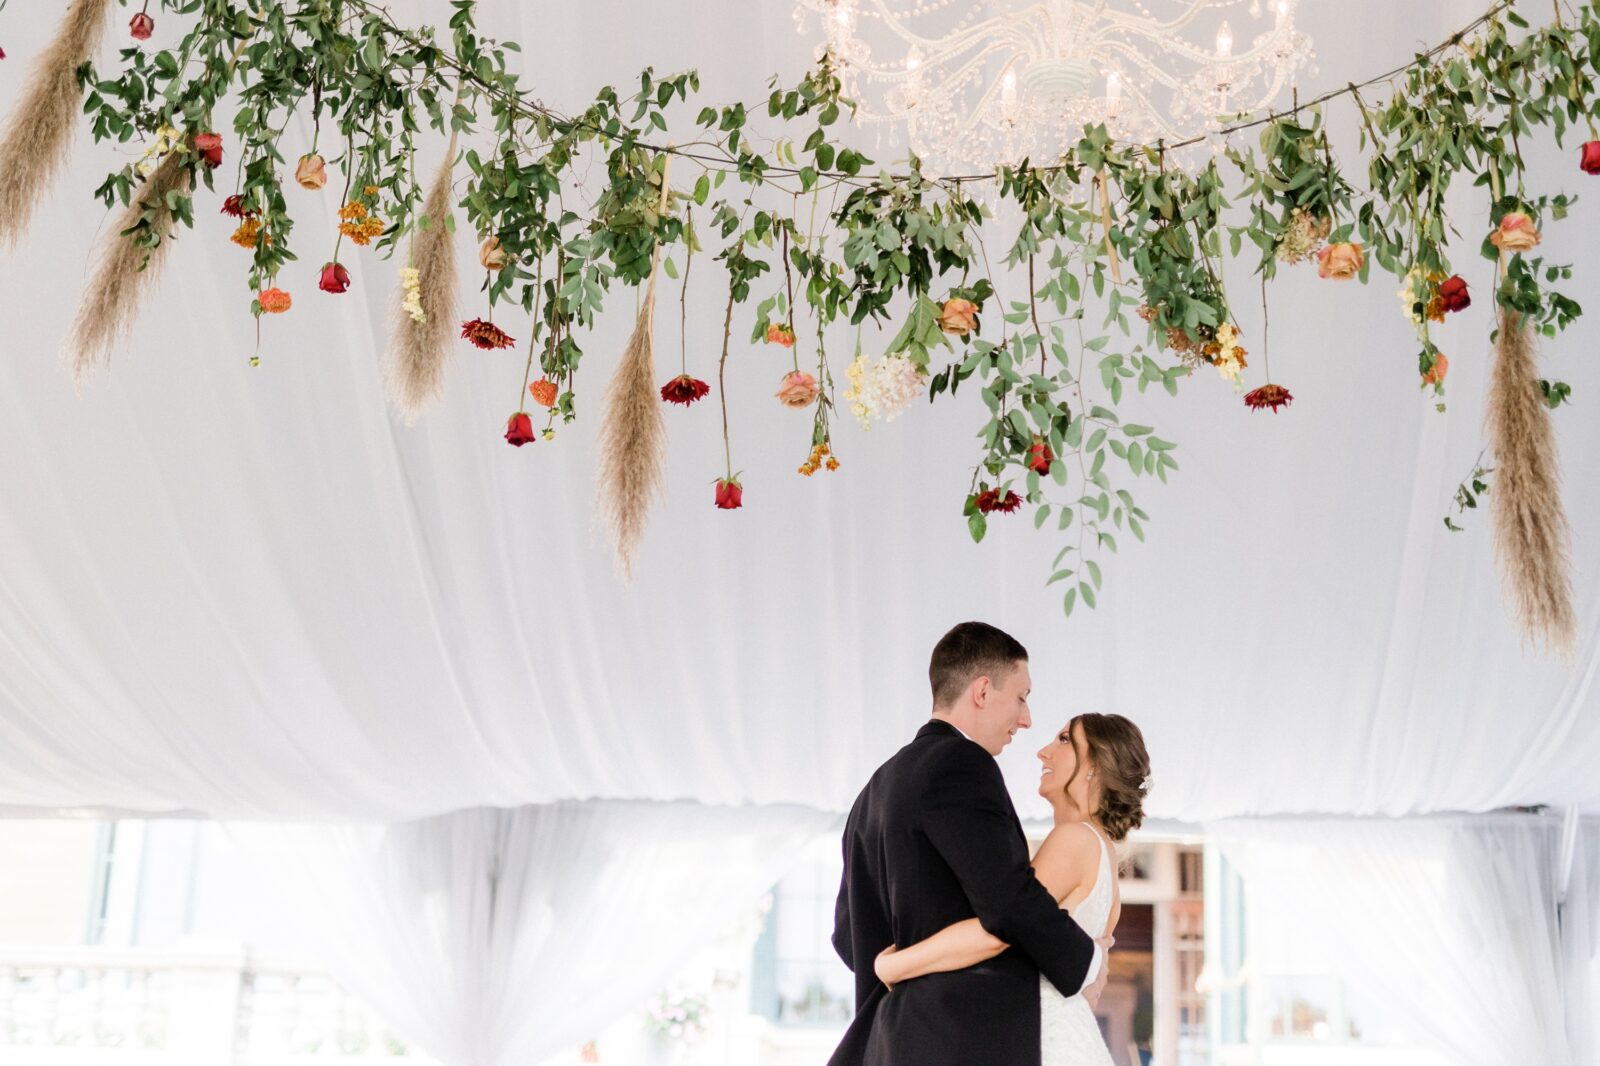 Bride and groom's first dance under the hanging flower arrangement at Box Hill Mansion photographed by Maria Silva Goyo